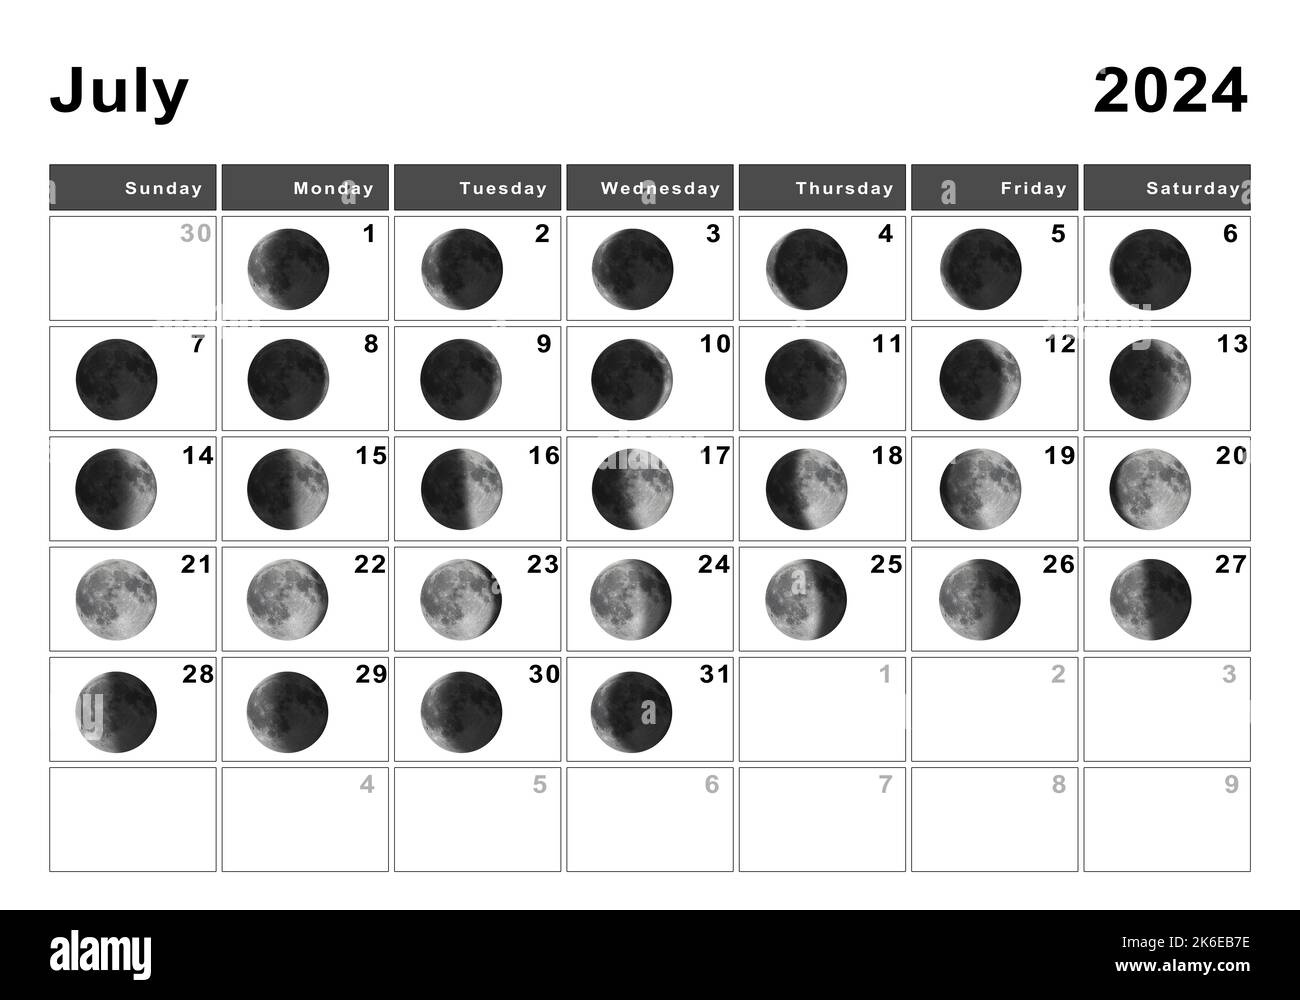 July 2024 Lunar Calendar, Moon Cycles, Moon Phases Stock Photo - Alamy with July 2024 Moon Calendar